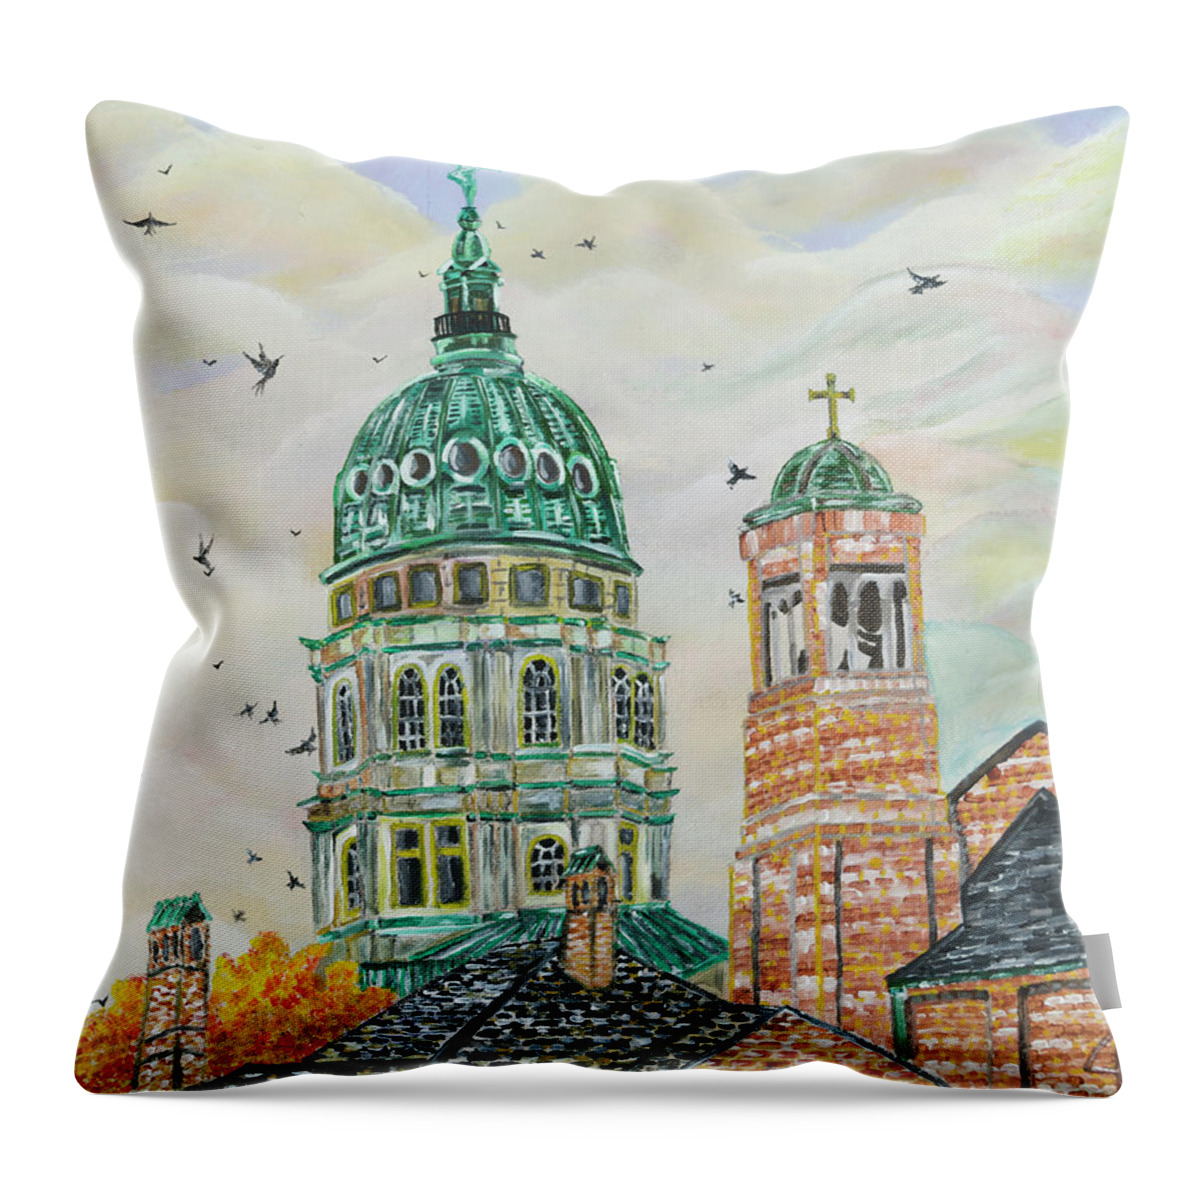 Acrylic Painting Art Throw Pillow featuring the painting End Of The Green College Of Crows by The GYPSY and Mad Hatter